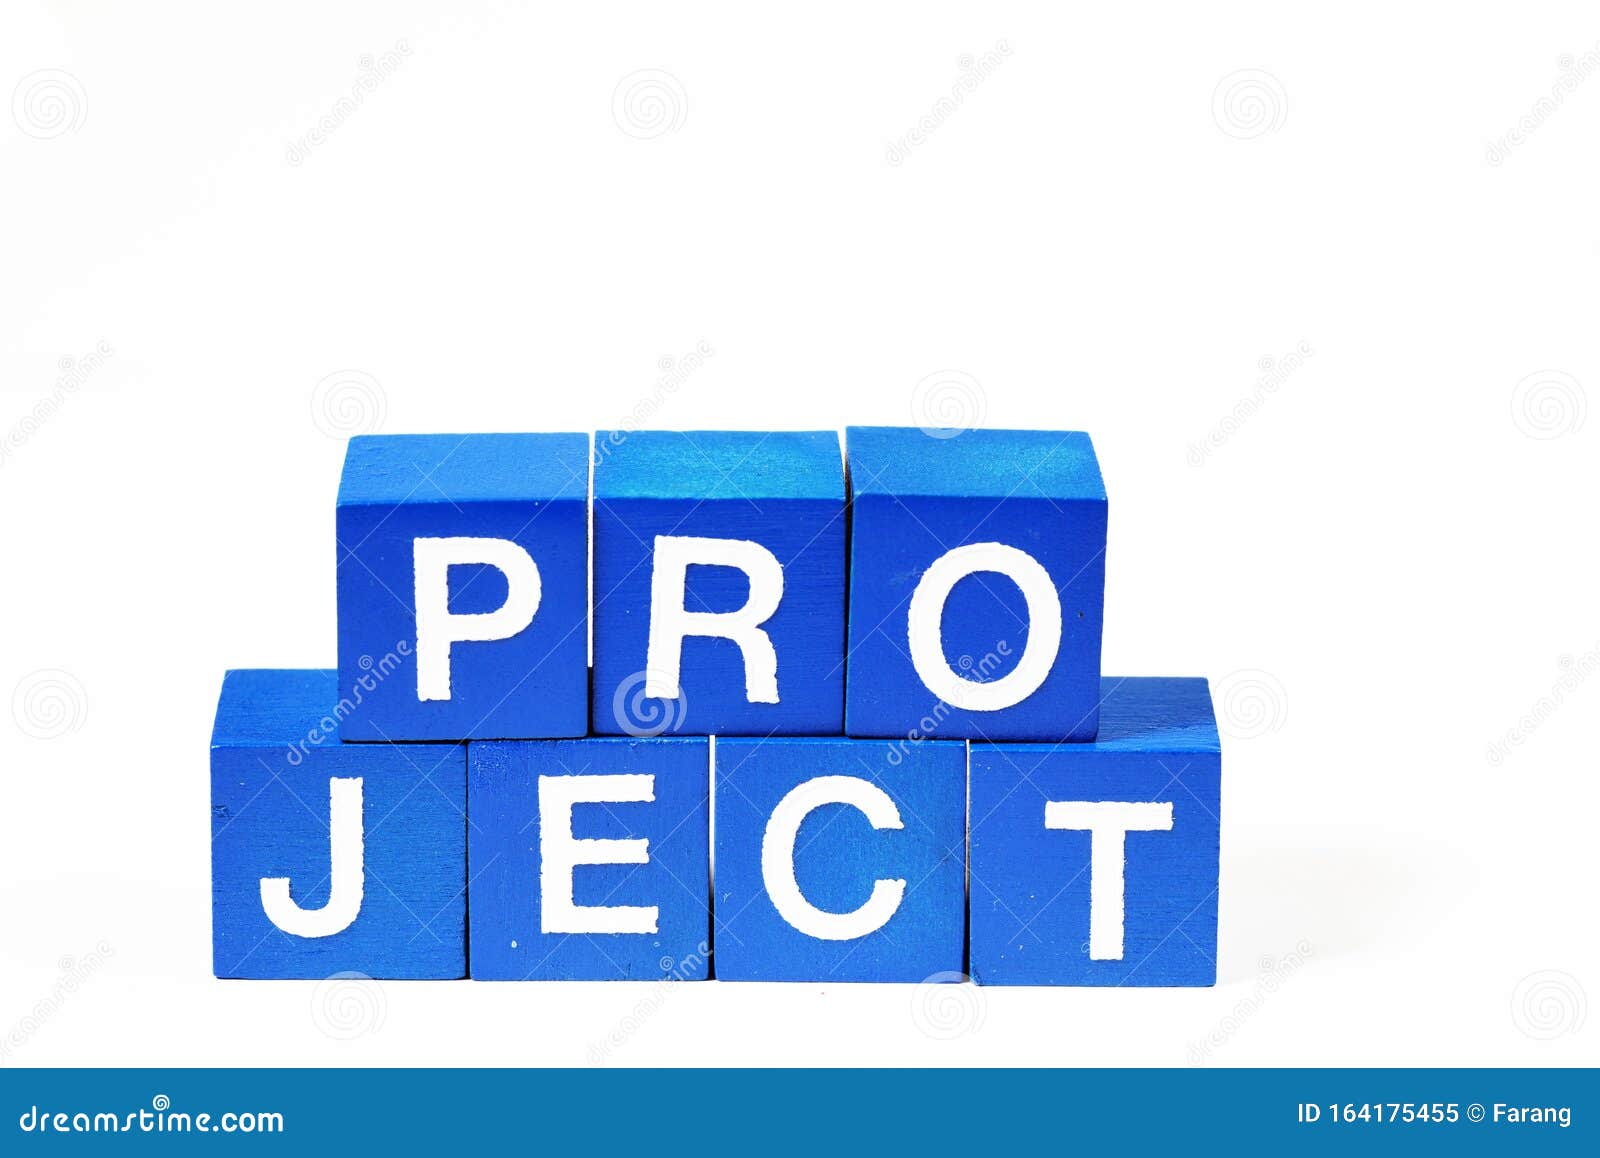 the word `project` spelled out in clear capitals